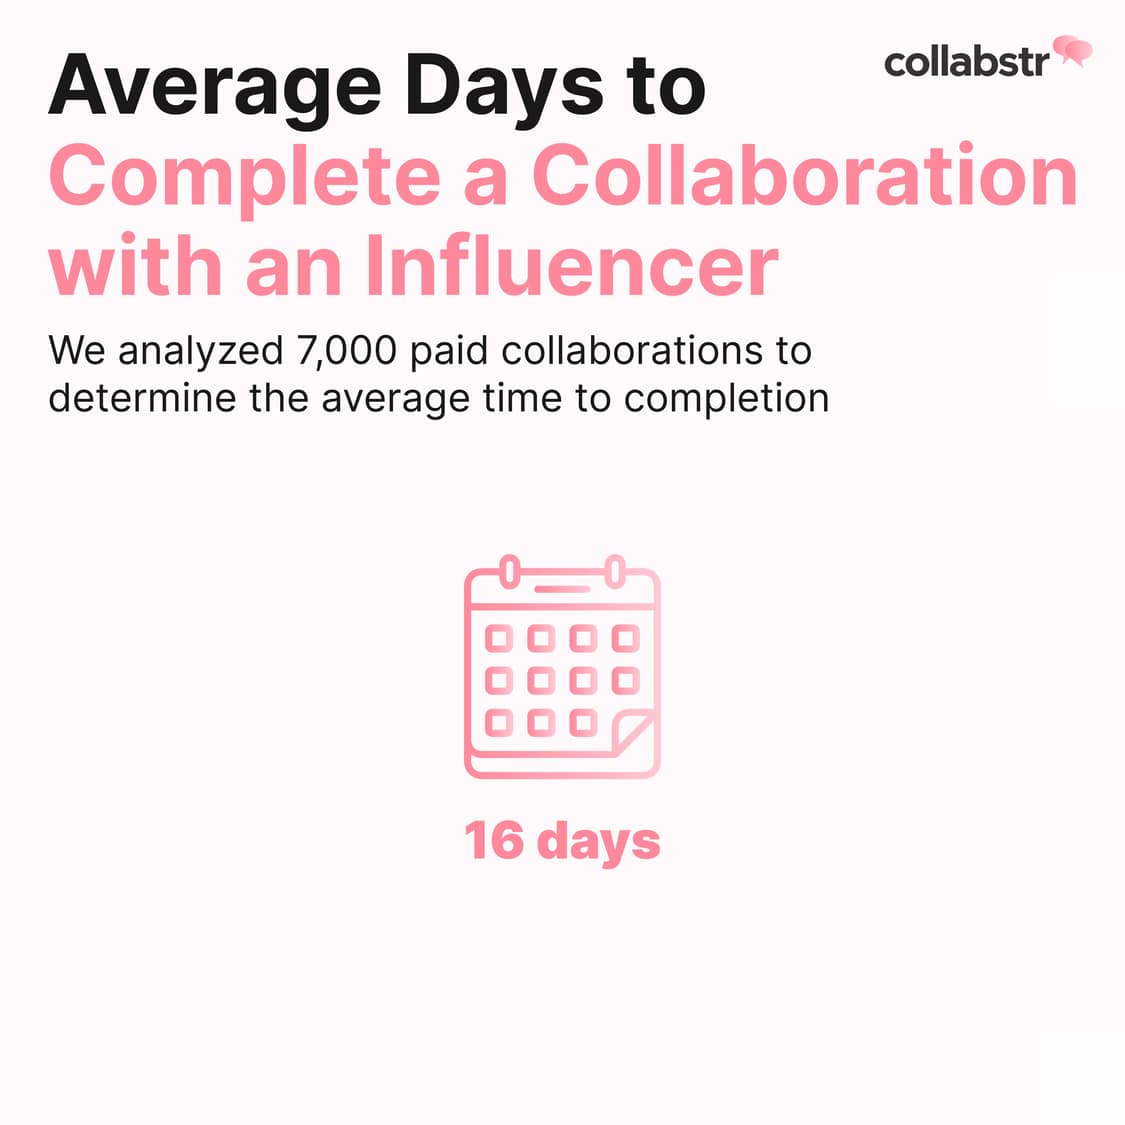 It takes 16 days on average to finish an influencer collaboration.